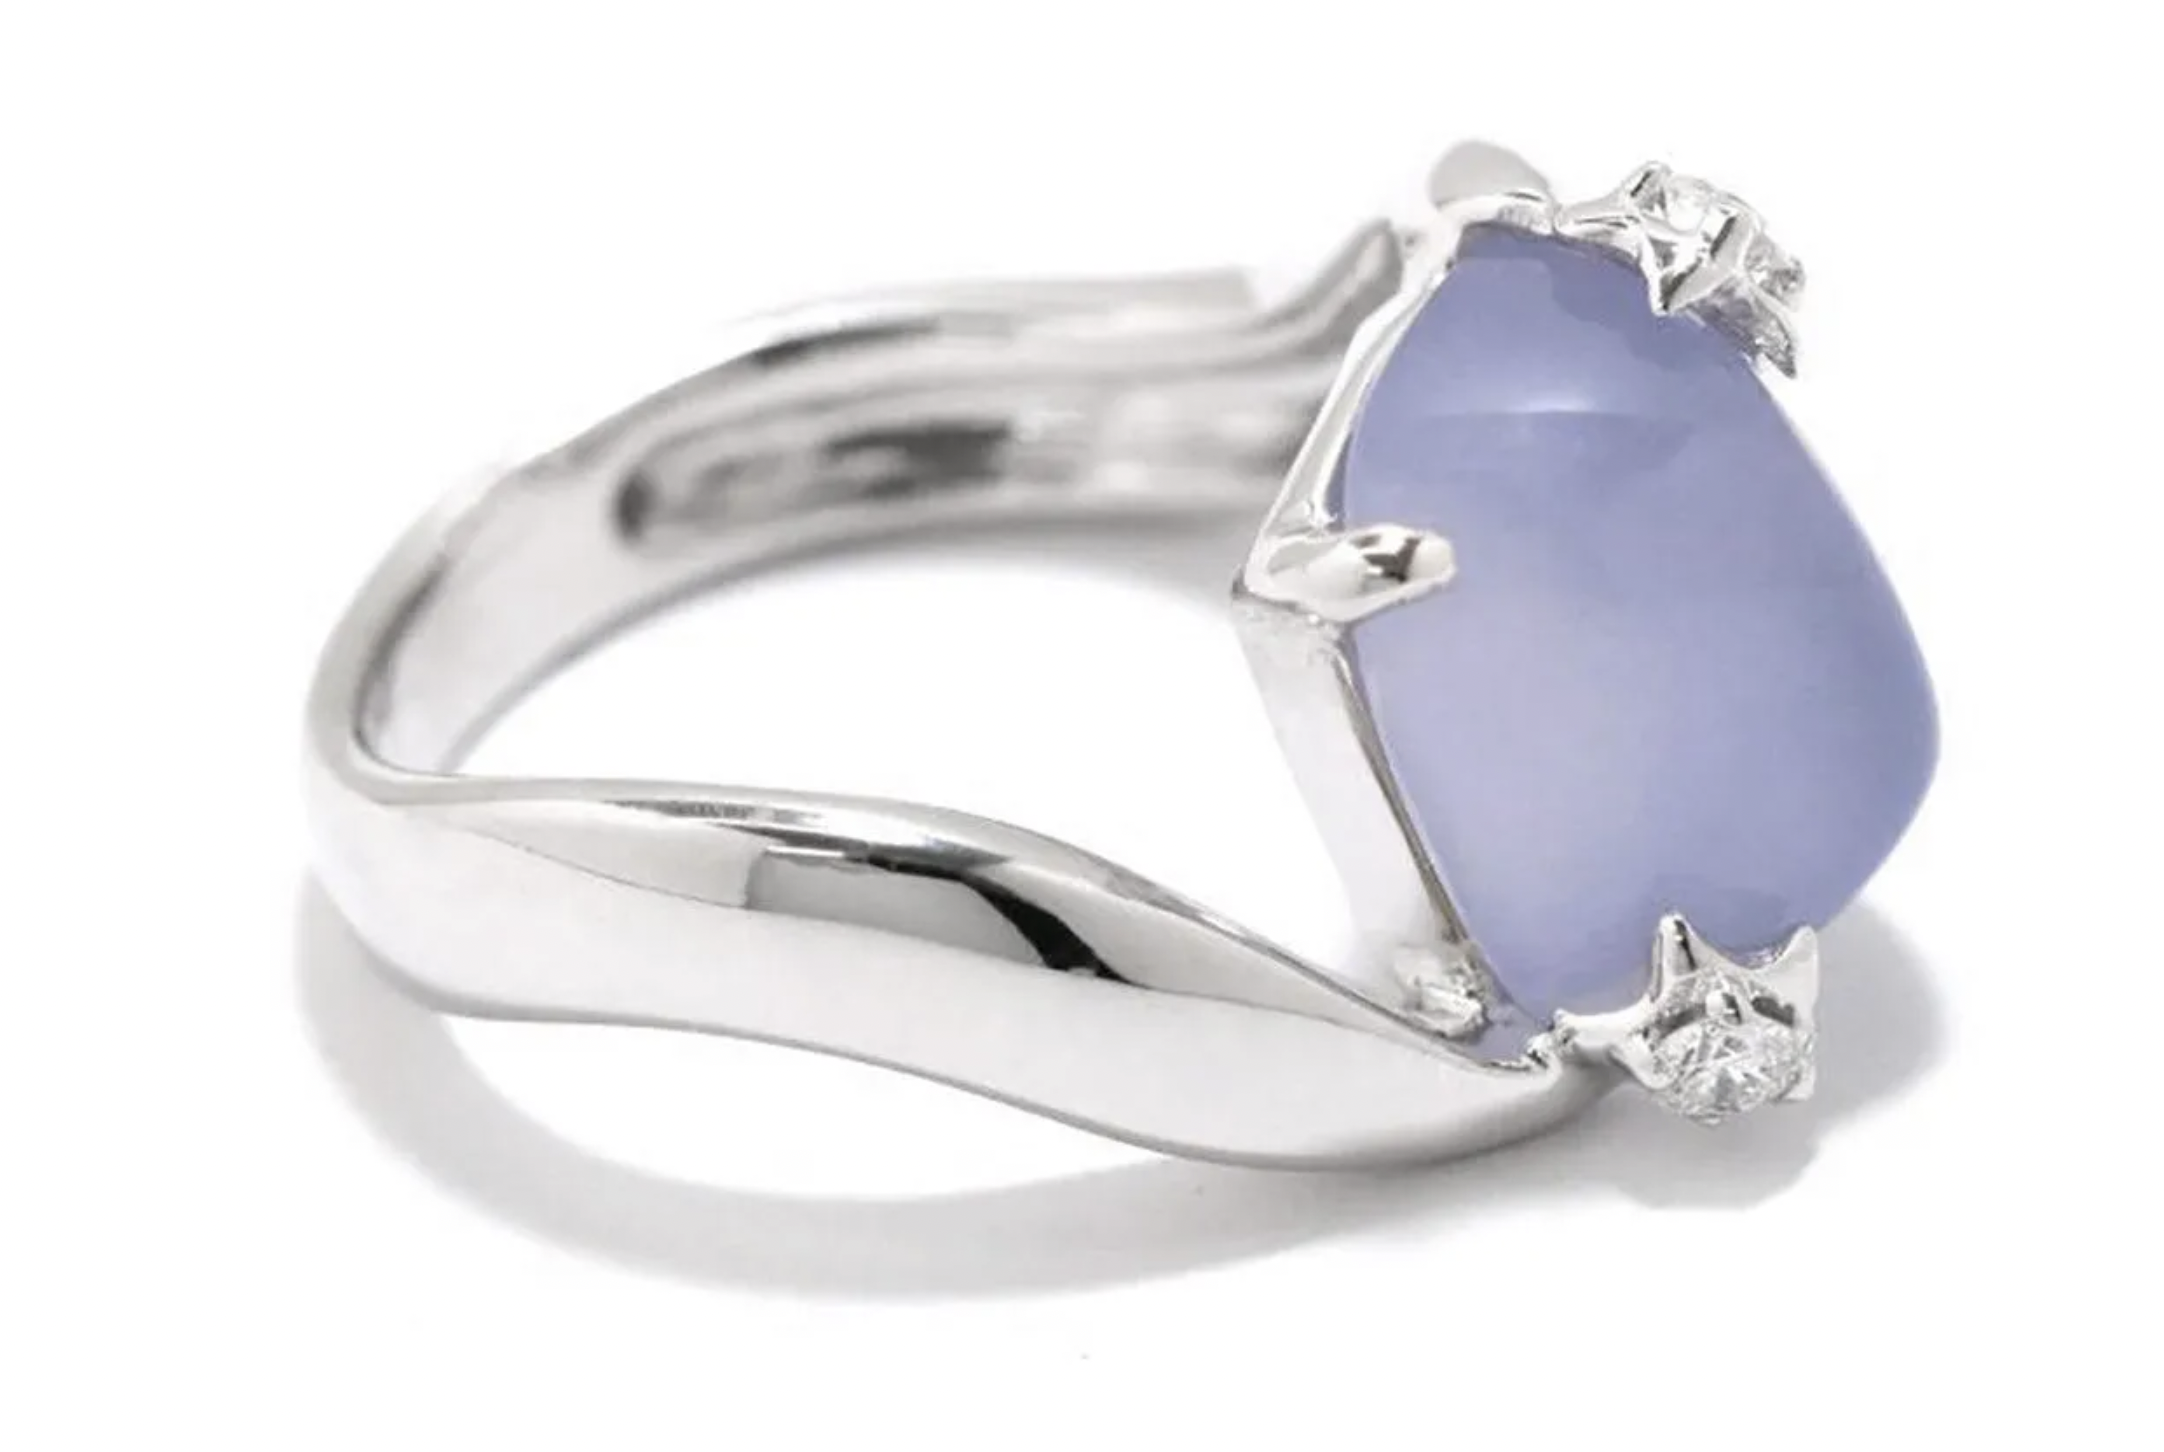 Chanel Comete 18K white gold, chalcedony and diamond ring, est. $4,500-$5,500